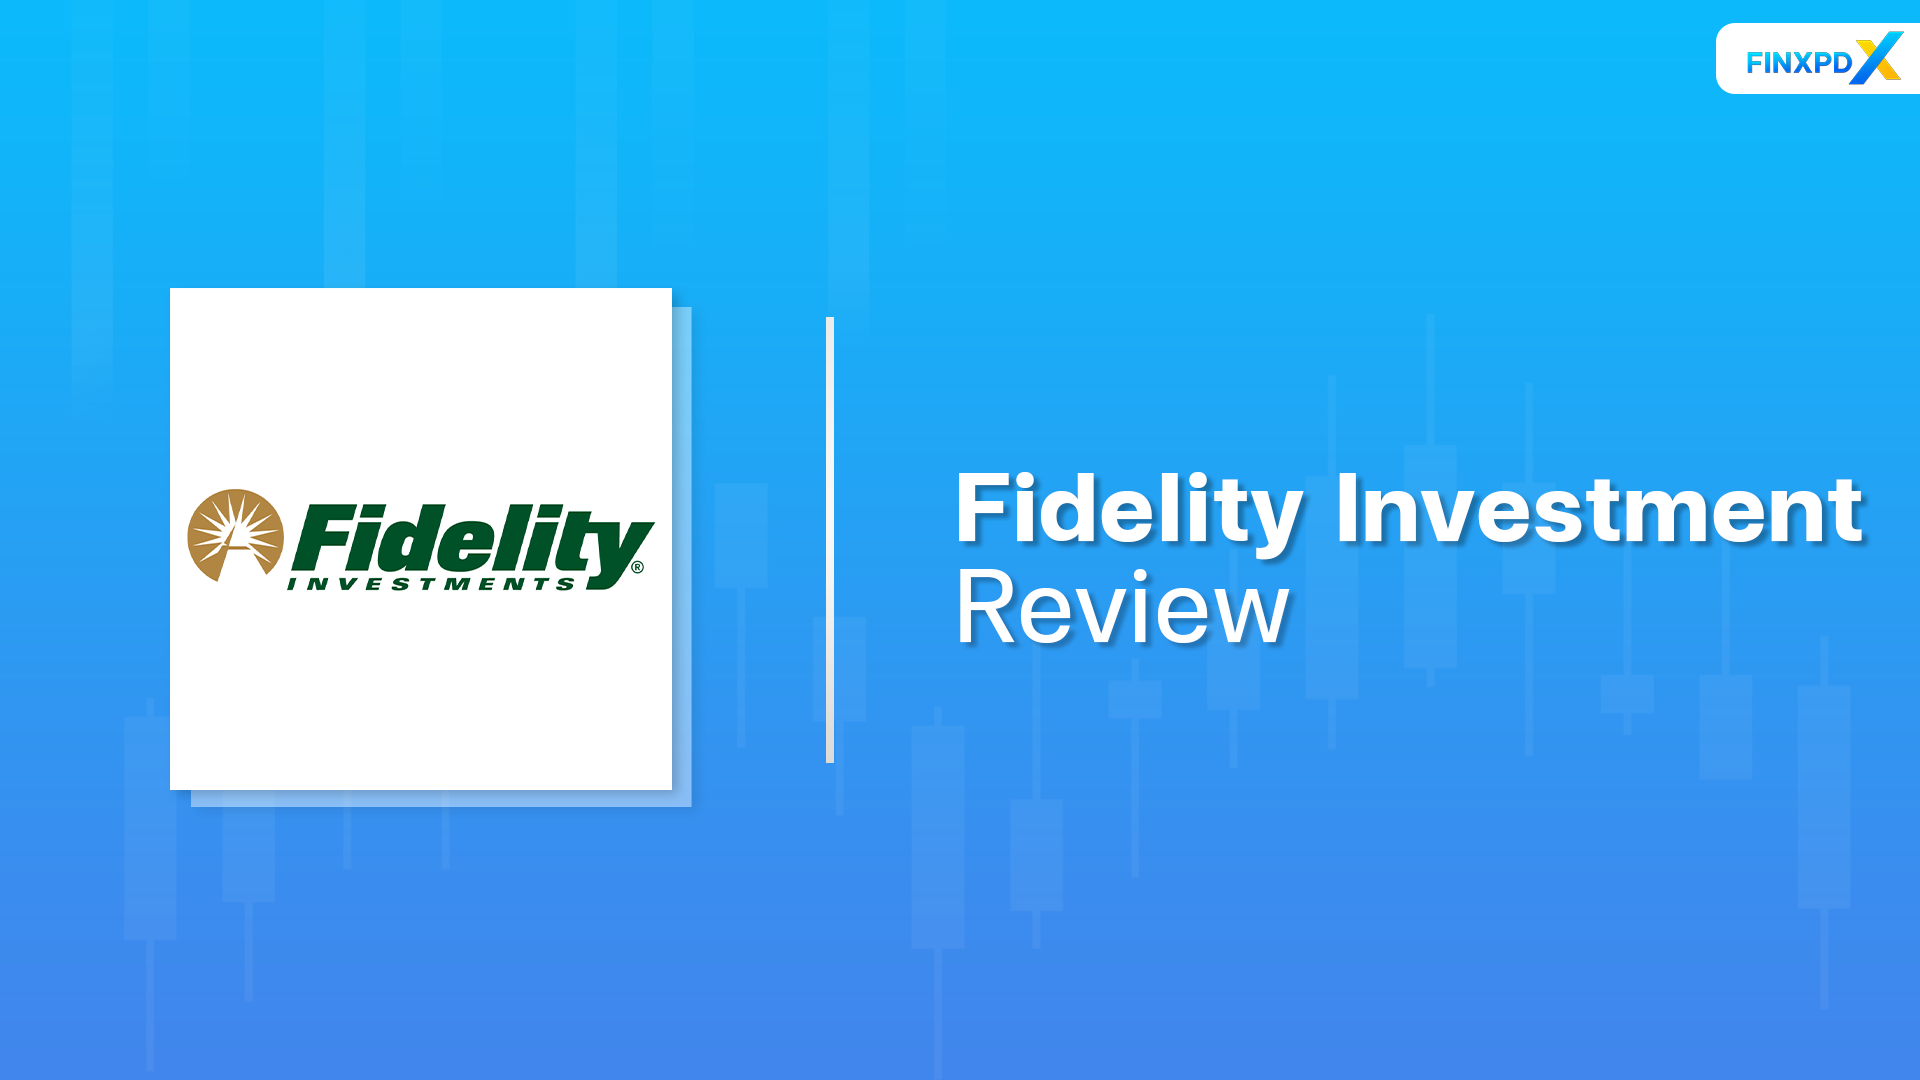 Fidelity Investment review